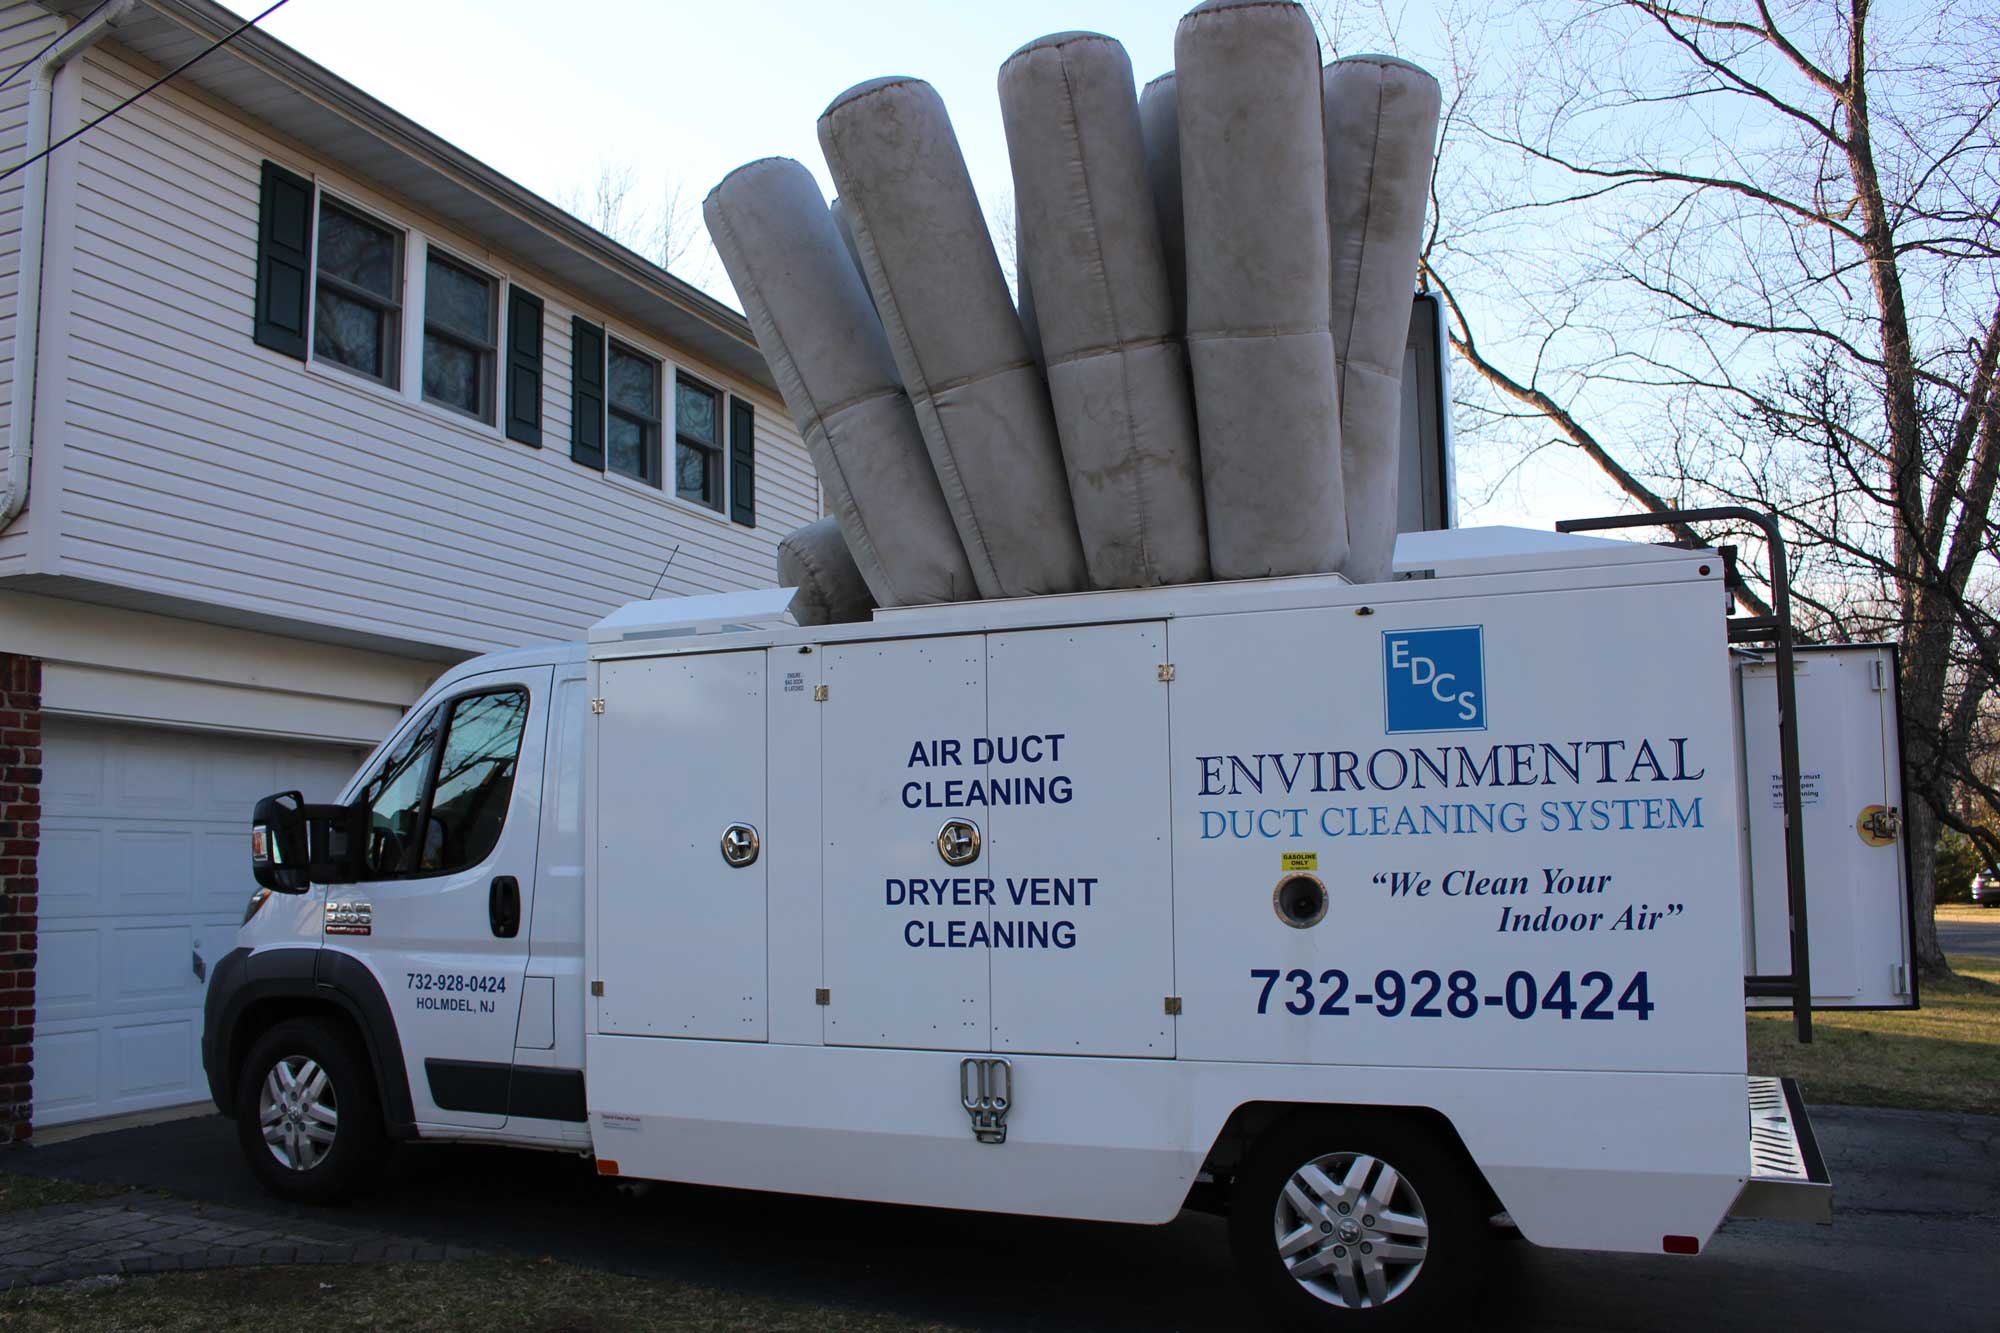 Environmental Duct Cleaning system truck at work!